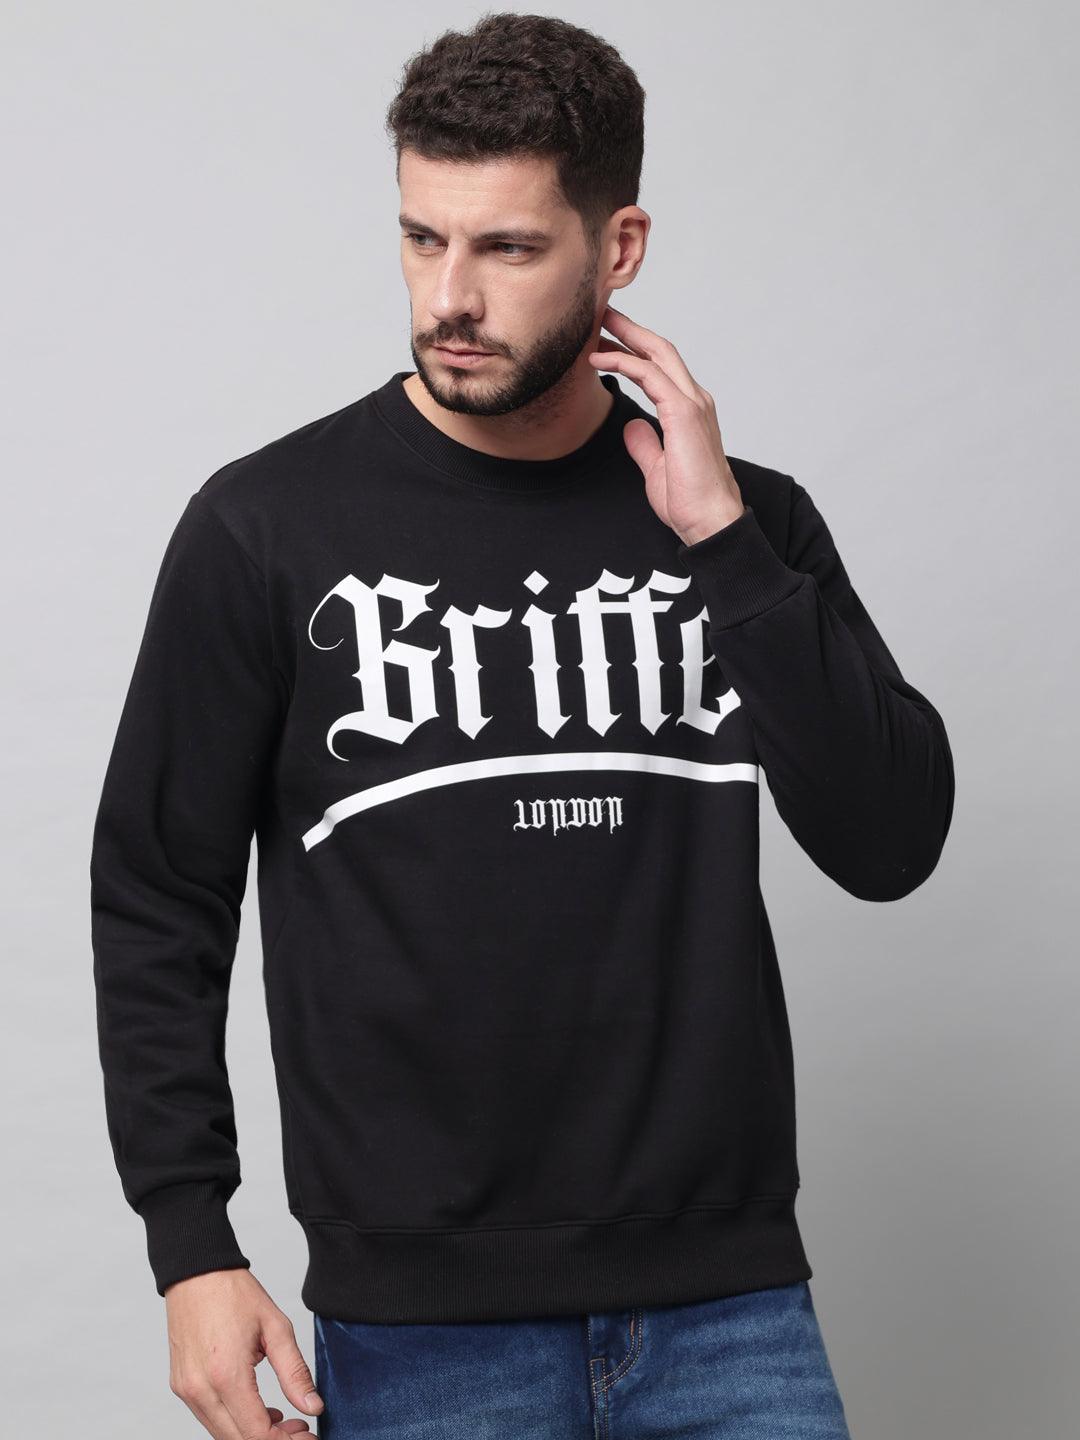 Griffel Men's Cotton Fleece Round Neck Sweatshirt with Full Sleeve and Front Print - griffel